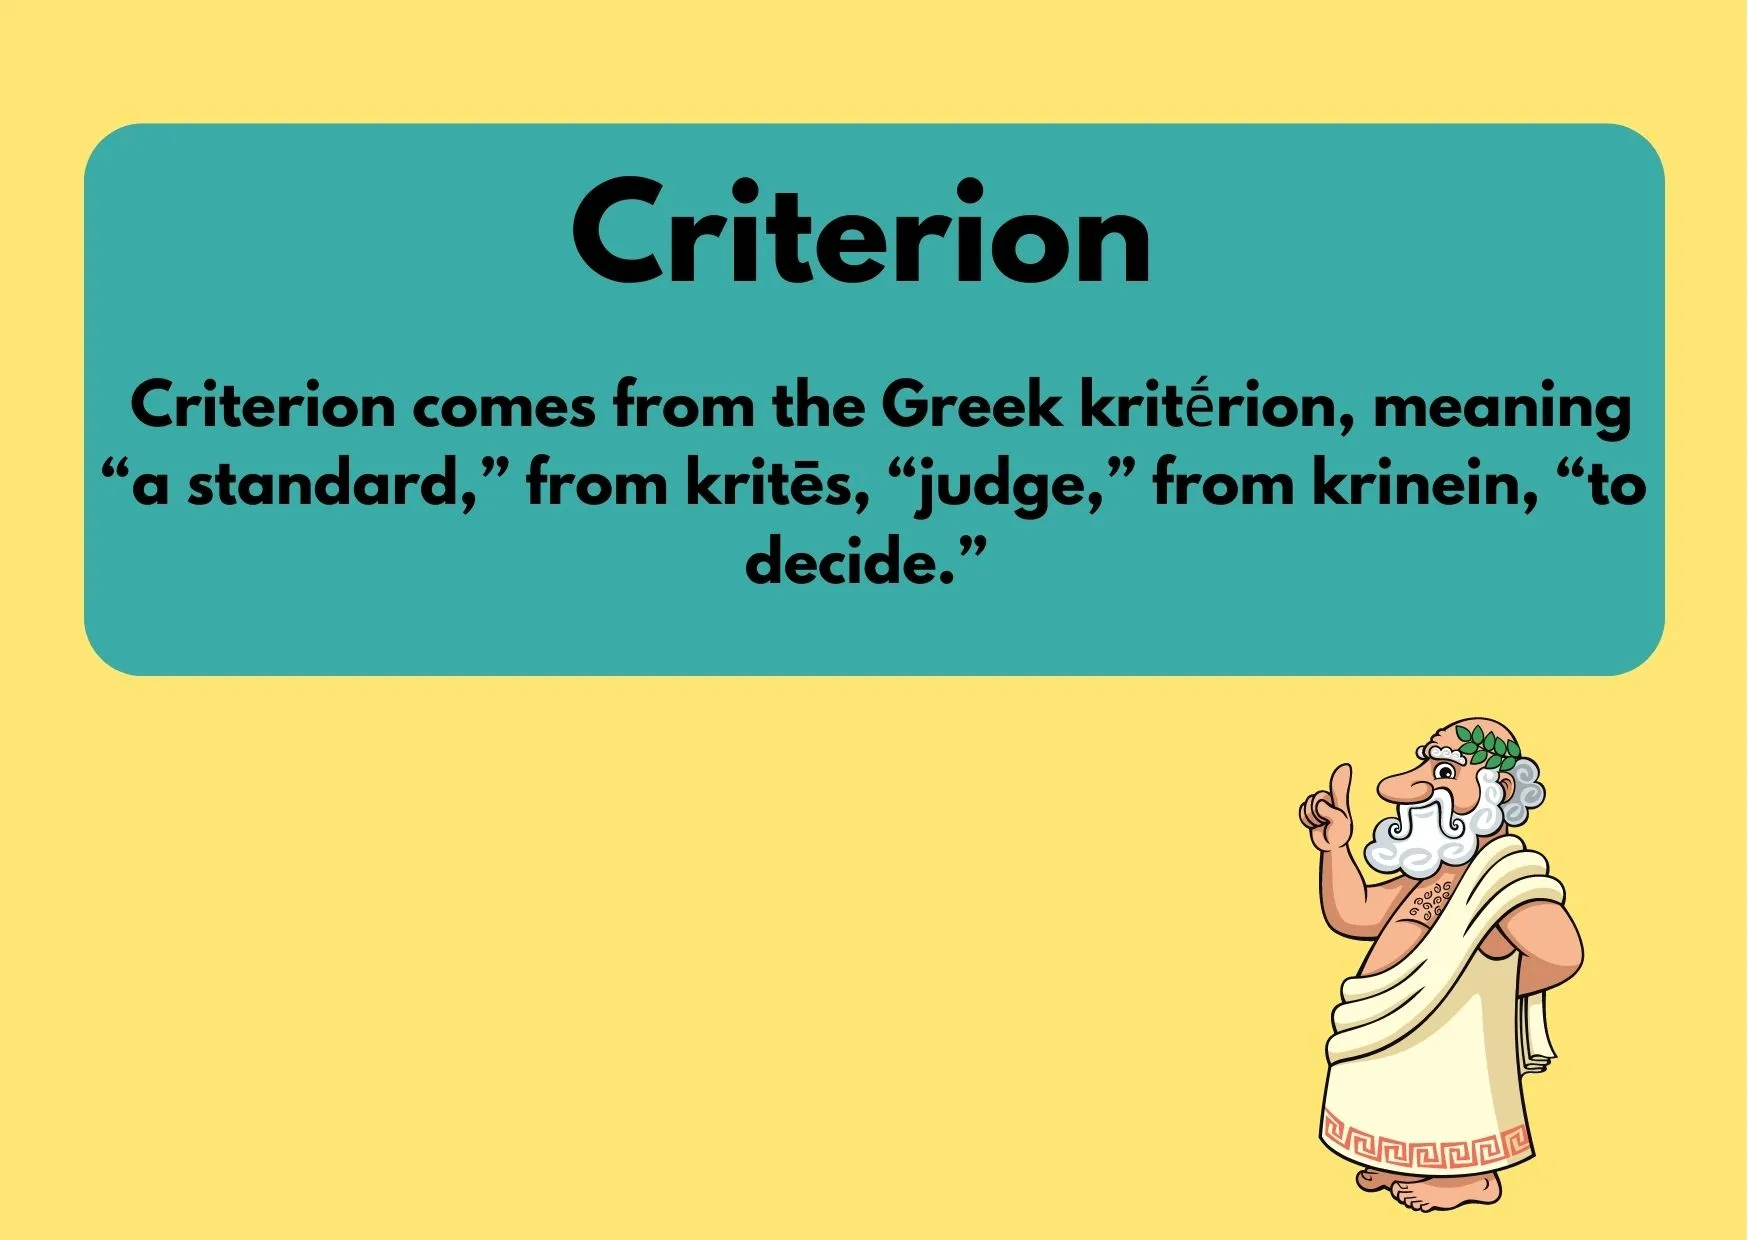 A graphic showing an old man in a toga from Greek times and the caption describing the origin of the word "Criterion:Criterion comes from the Greek kritḗrion, meaning “a standard,” from kritēs, “judge,” from krinein, “to decide.” "